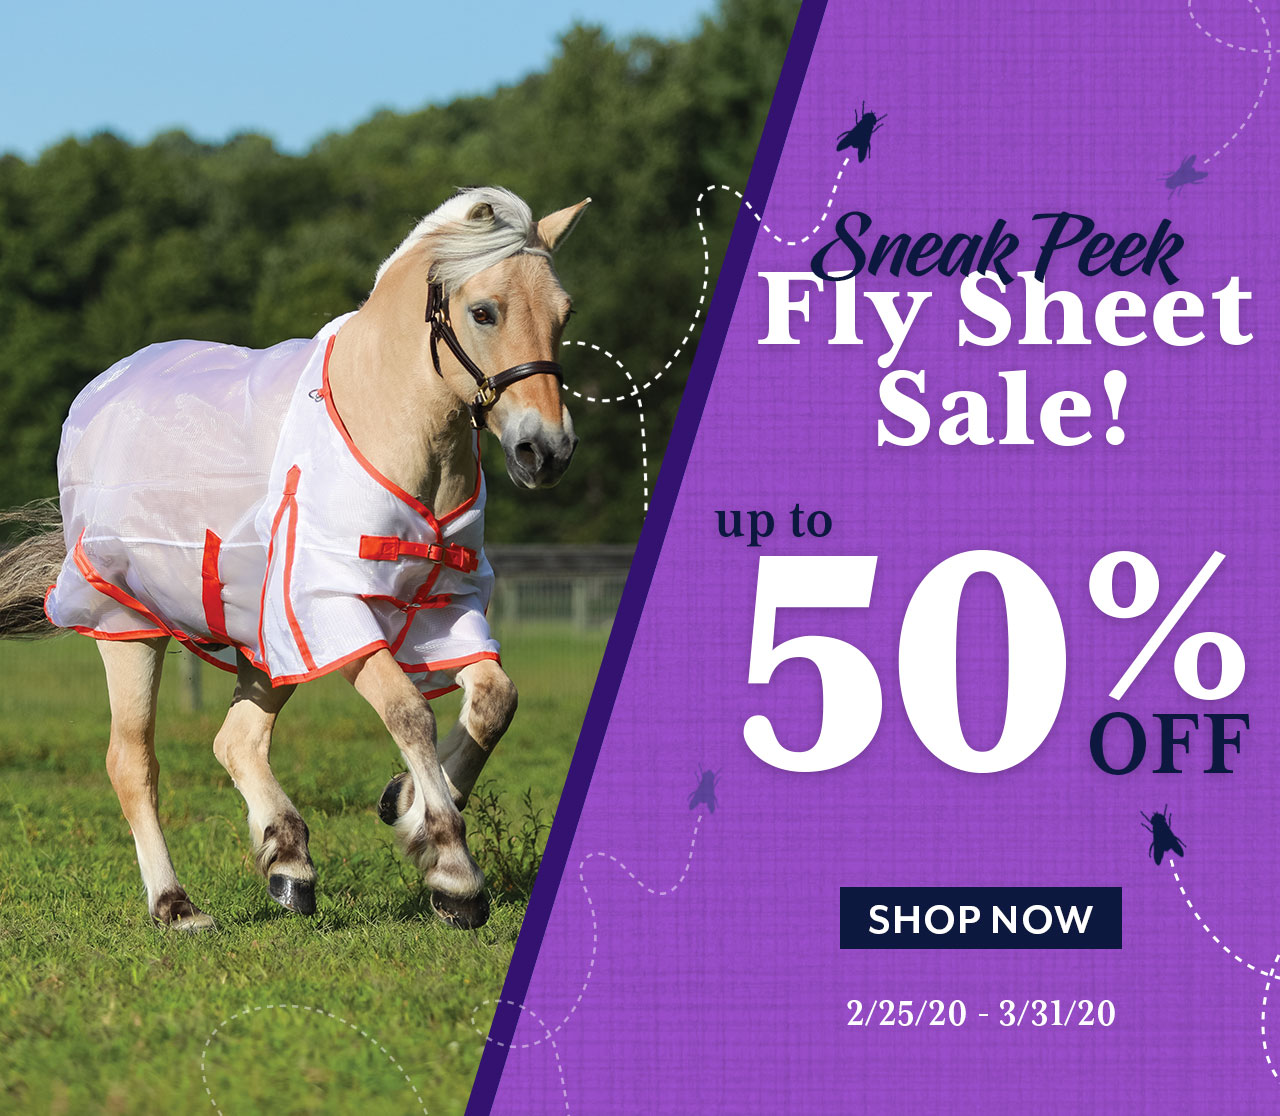 Pre-Season Fly Sale: Up to 50% off! Offer valid 2/25/20 - 3/31/20.